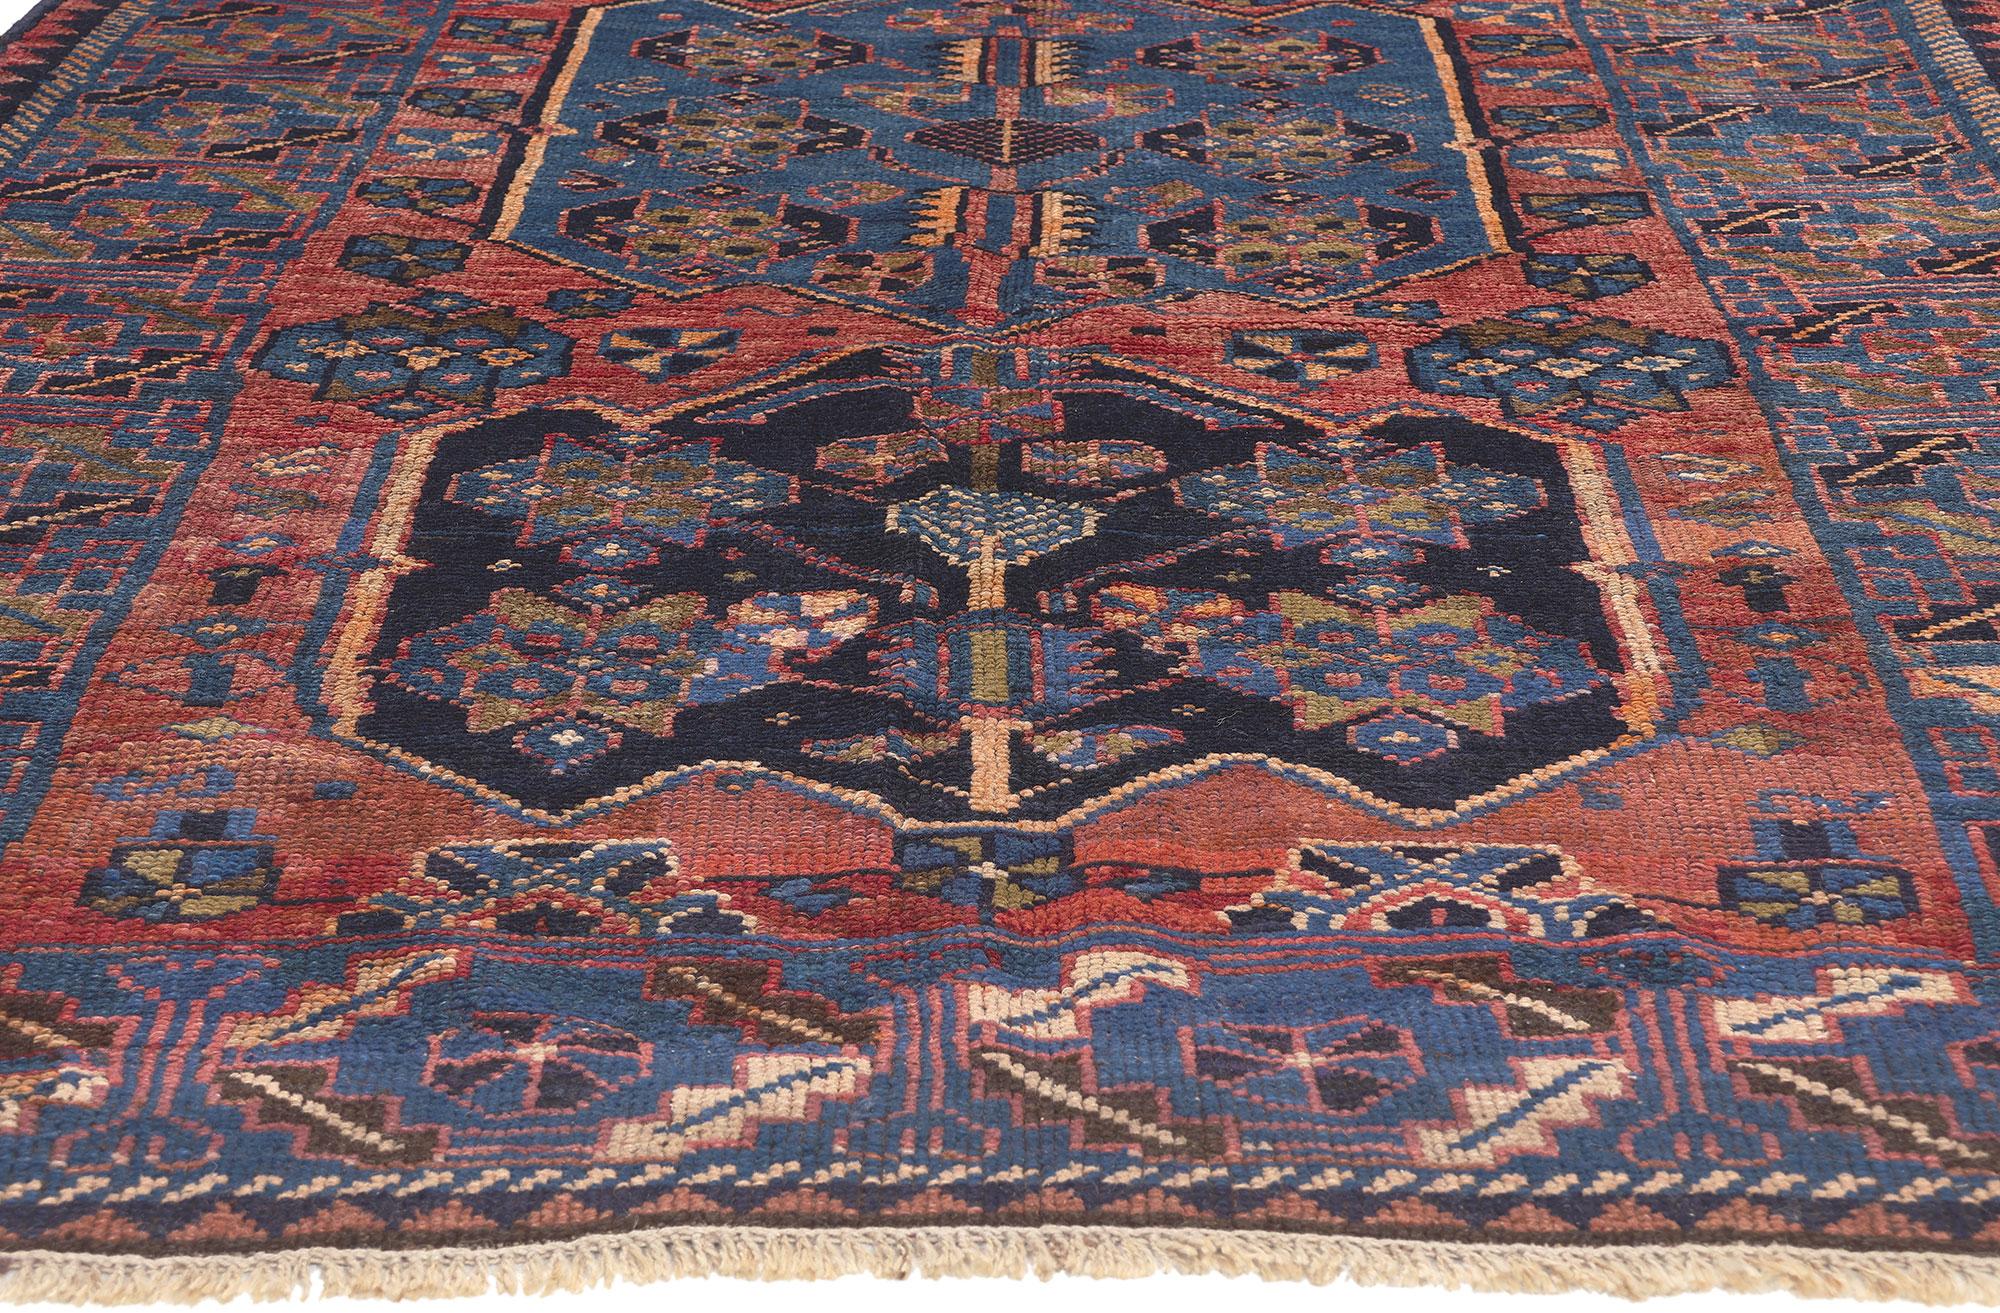 Antique Persian Tribal Shiraz Rug with Qashqai Tribe Influence In Good Condition For Sale In Dallas, TX